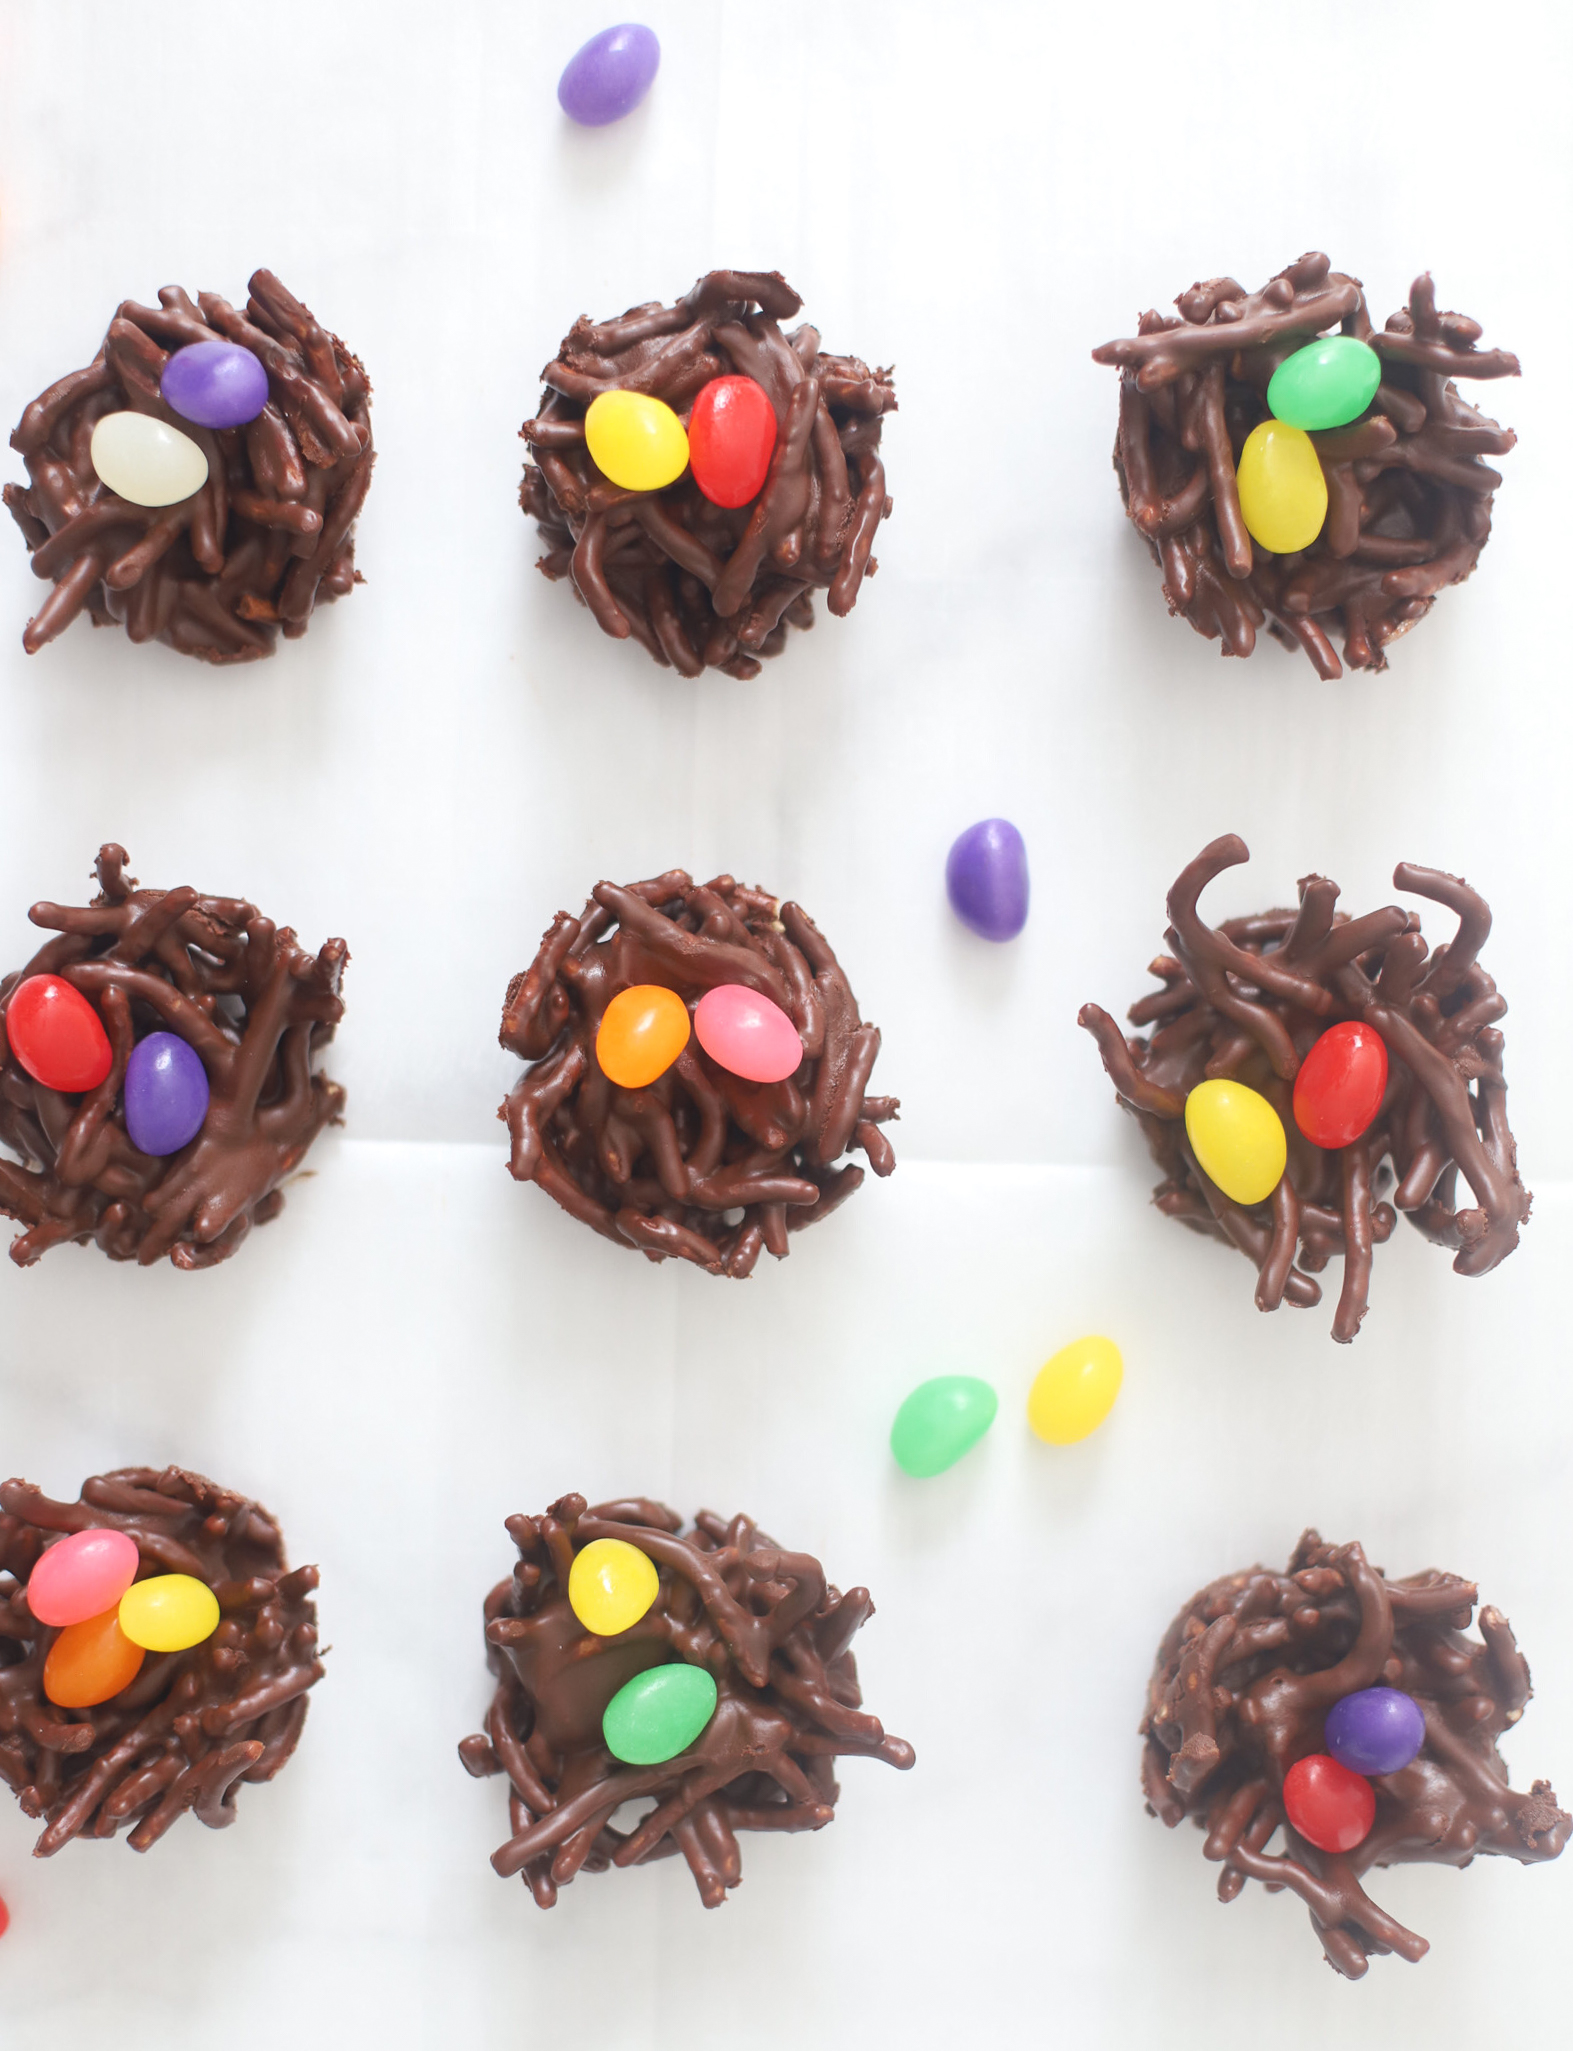 Celebrate Easter and the spring season with these adorable no-bake chocolate birds nests. The recipe is super simple to make, totally kid-friendly, and with a few easy tweaks, your chocolate bird's nest can be made totally vegan! | glitterinc.com | @glitterinc